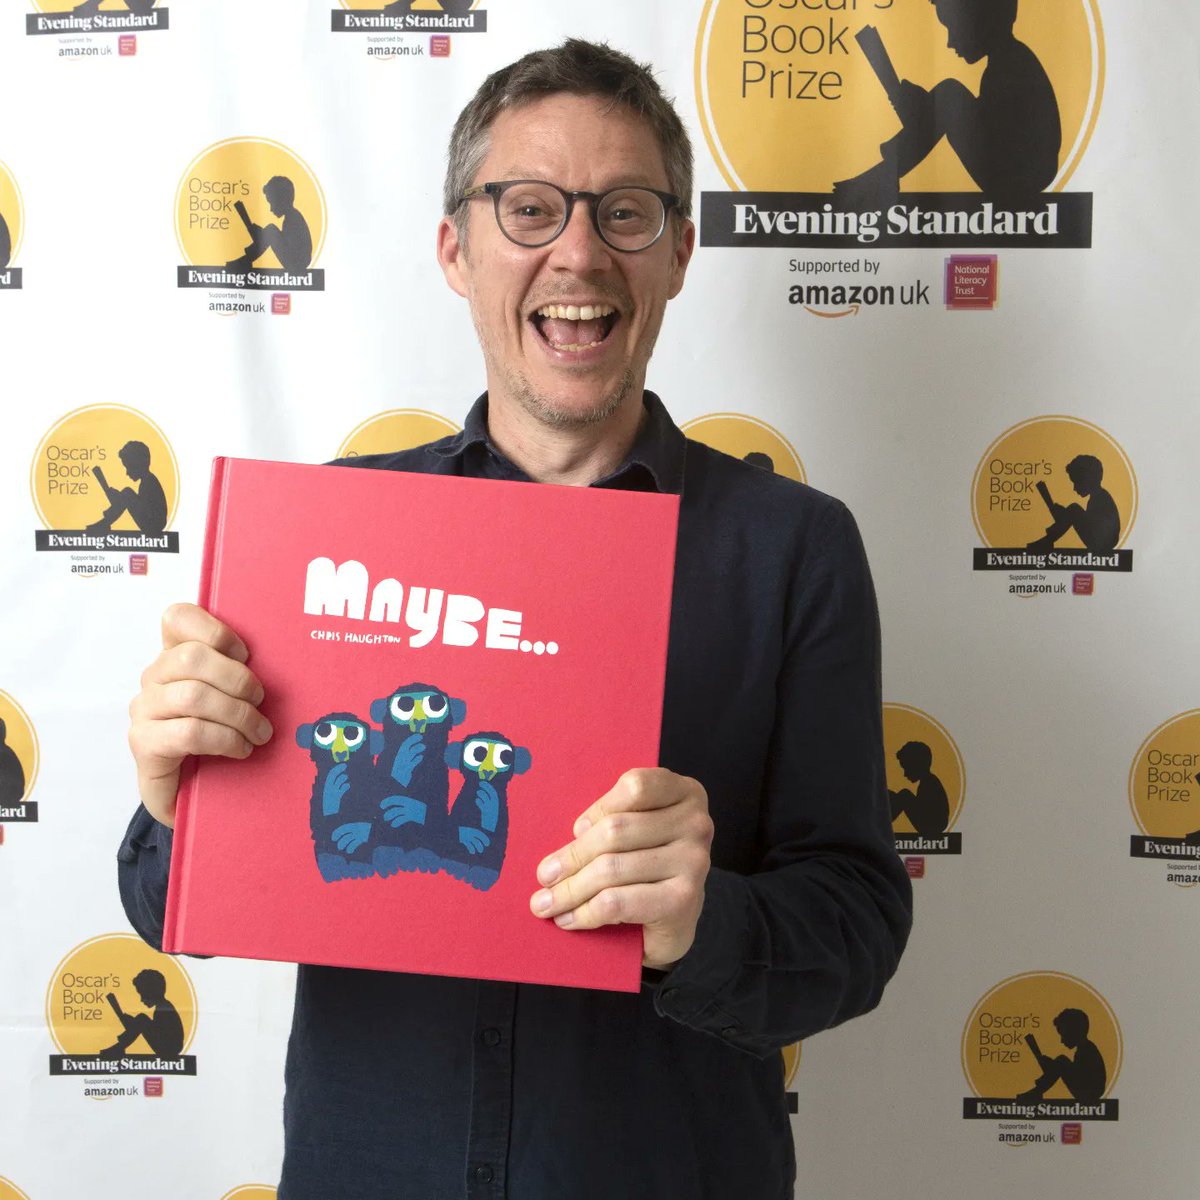 Introducing our Judges! We are excited to welcome our illustrious panel! We are delighted to have @oscarsbookprize 2022 winner @chrishaughton on the panel. Chris is a designer and hugely popular children's book author. Find out more: bit.ly/3z7tjb5